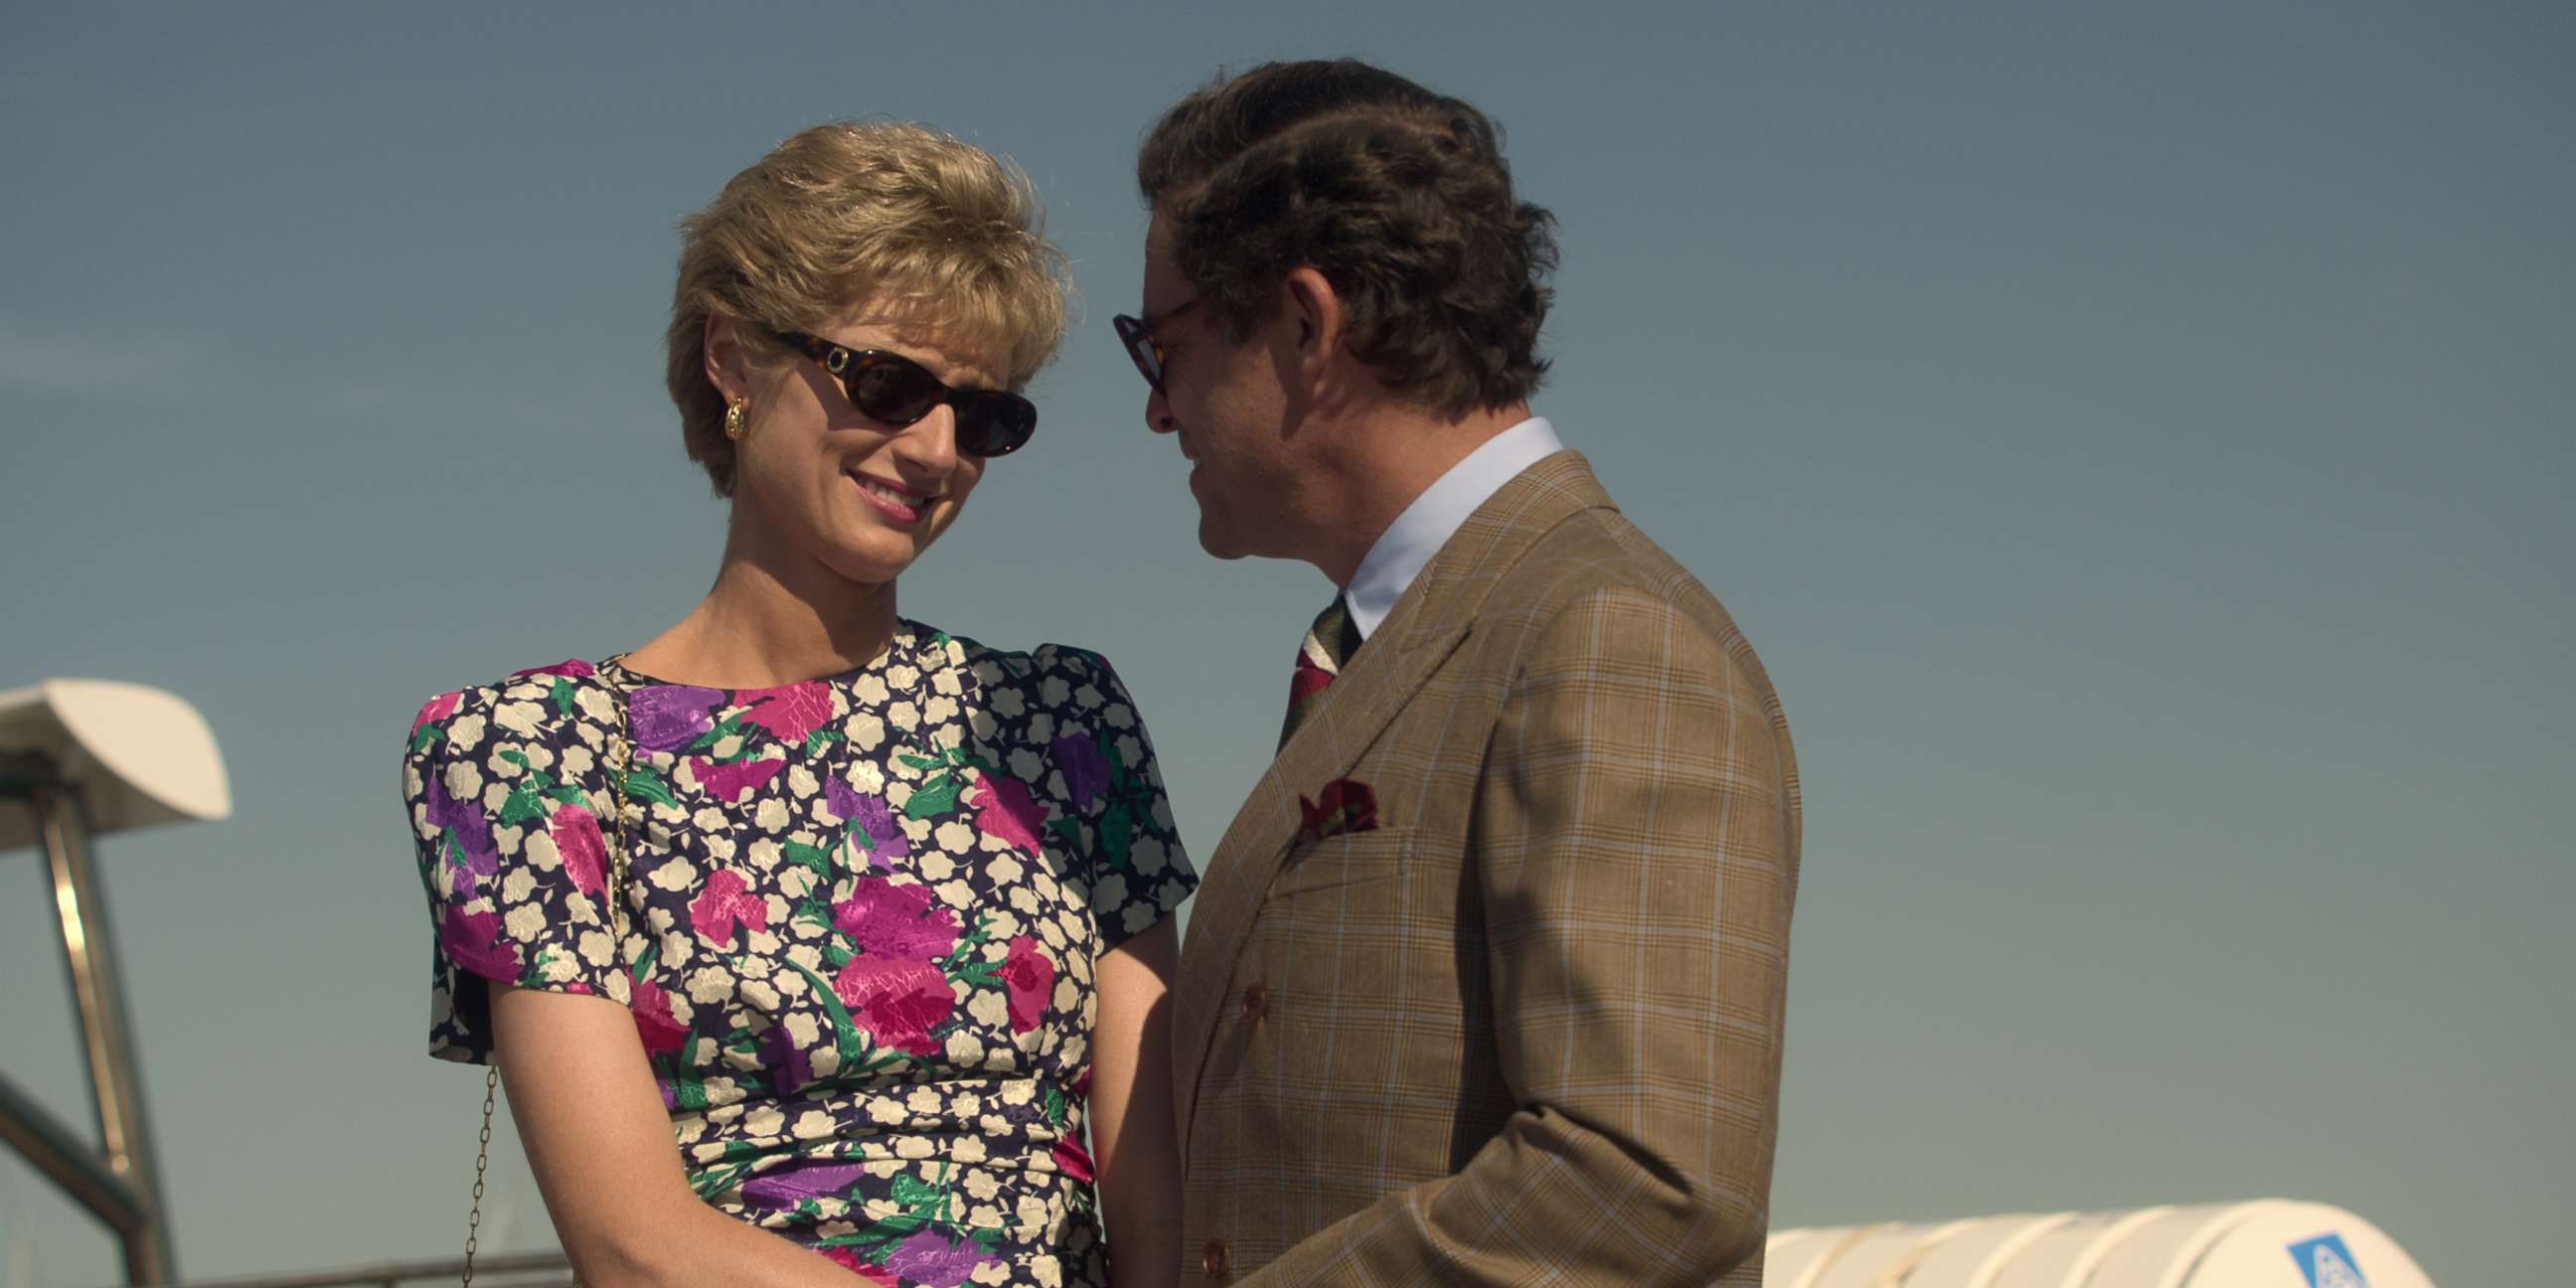 PHOTO: Elizabeth Debicki as Diana and Dominic West as Prince Charles in season 5 of "The Crown."